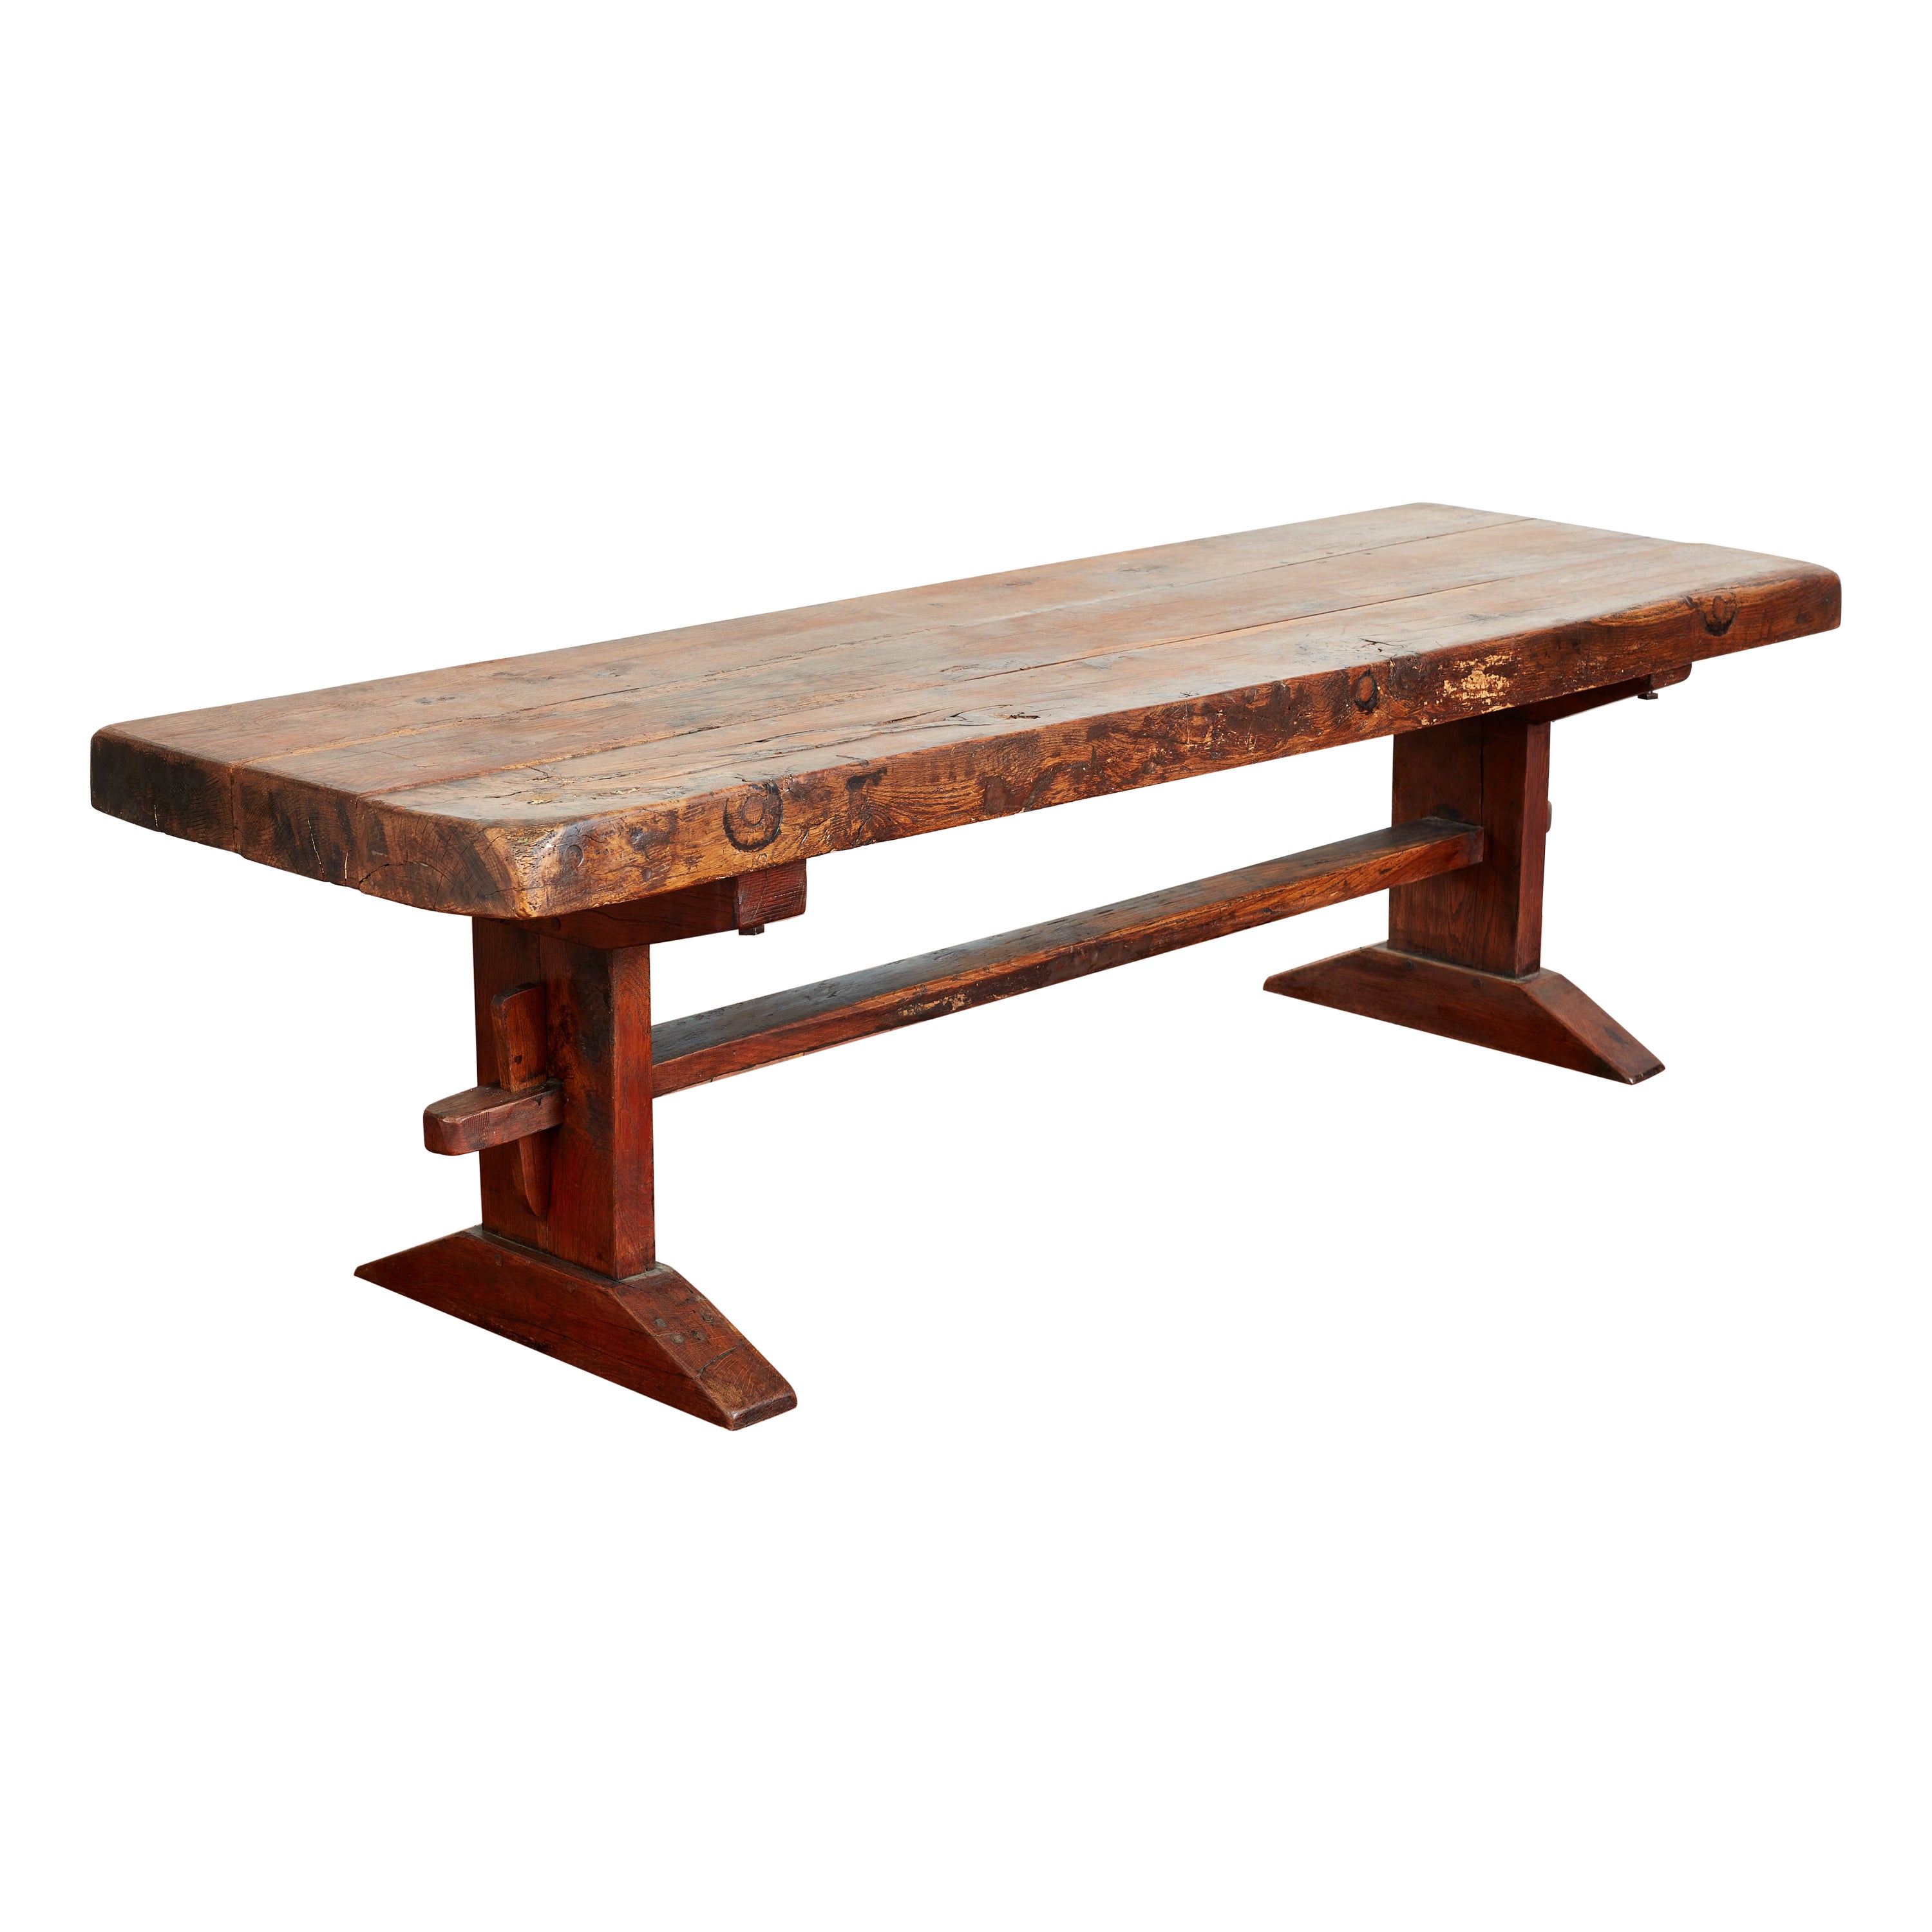 French Farm Table For Sale